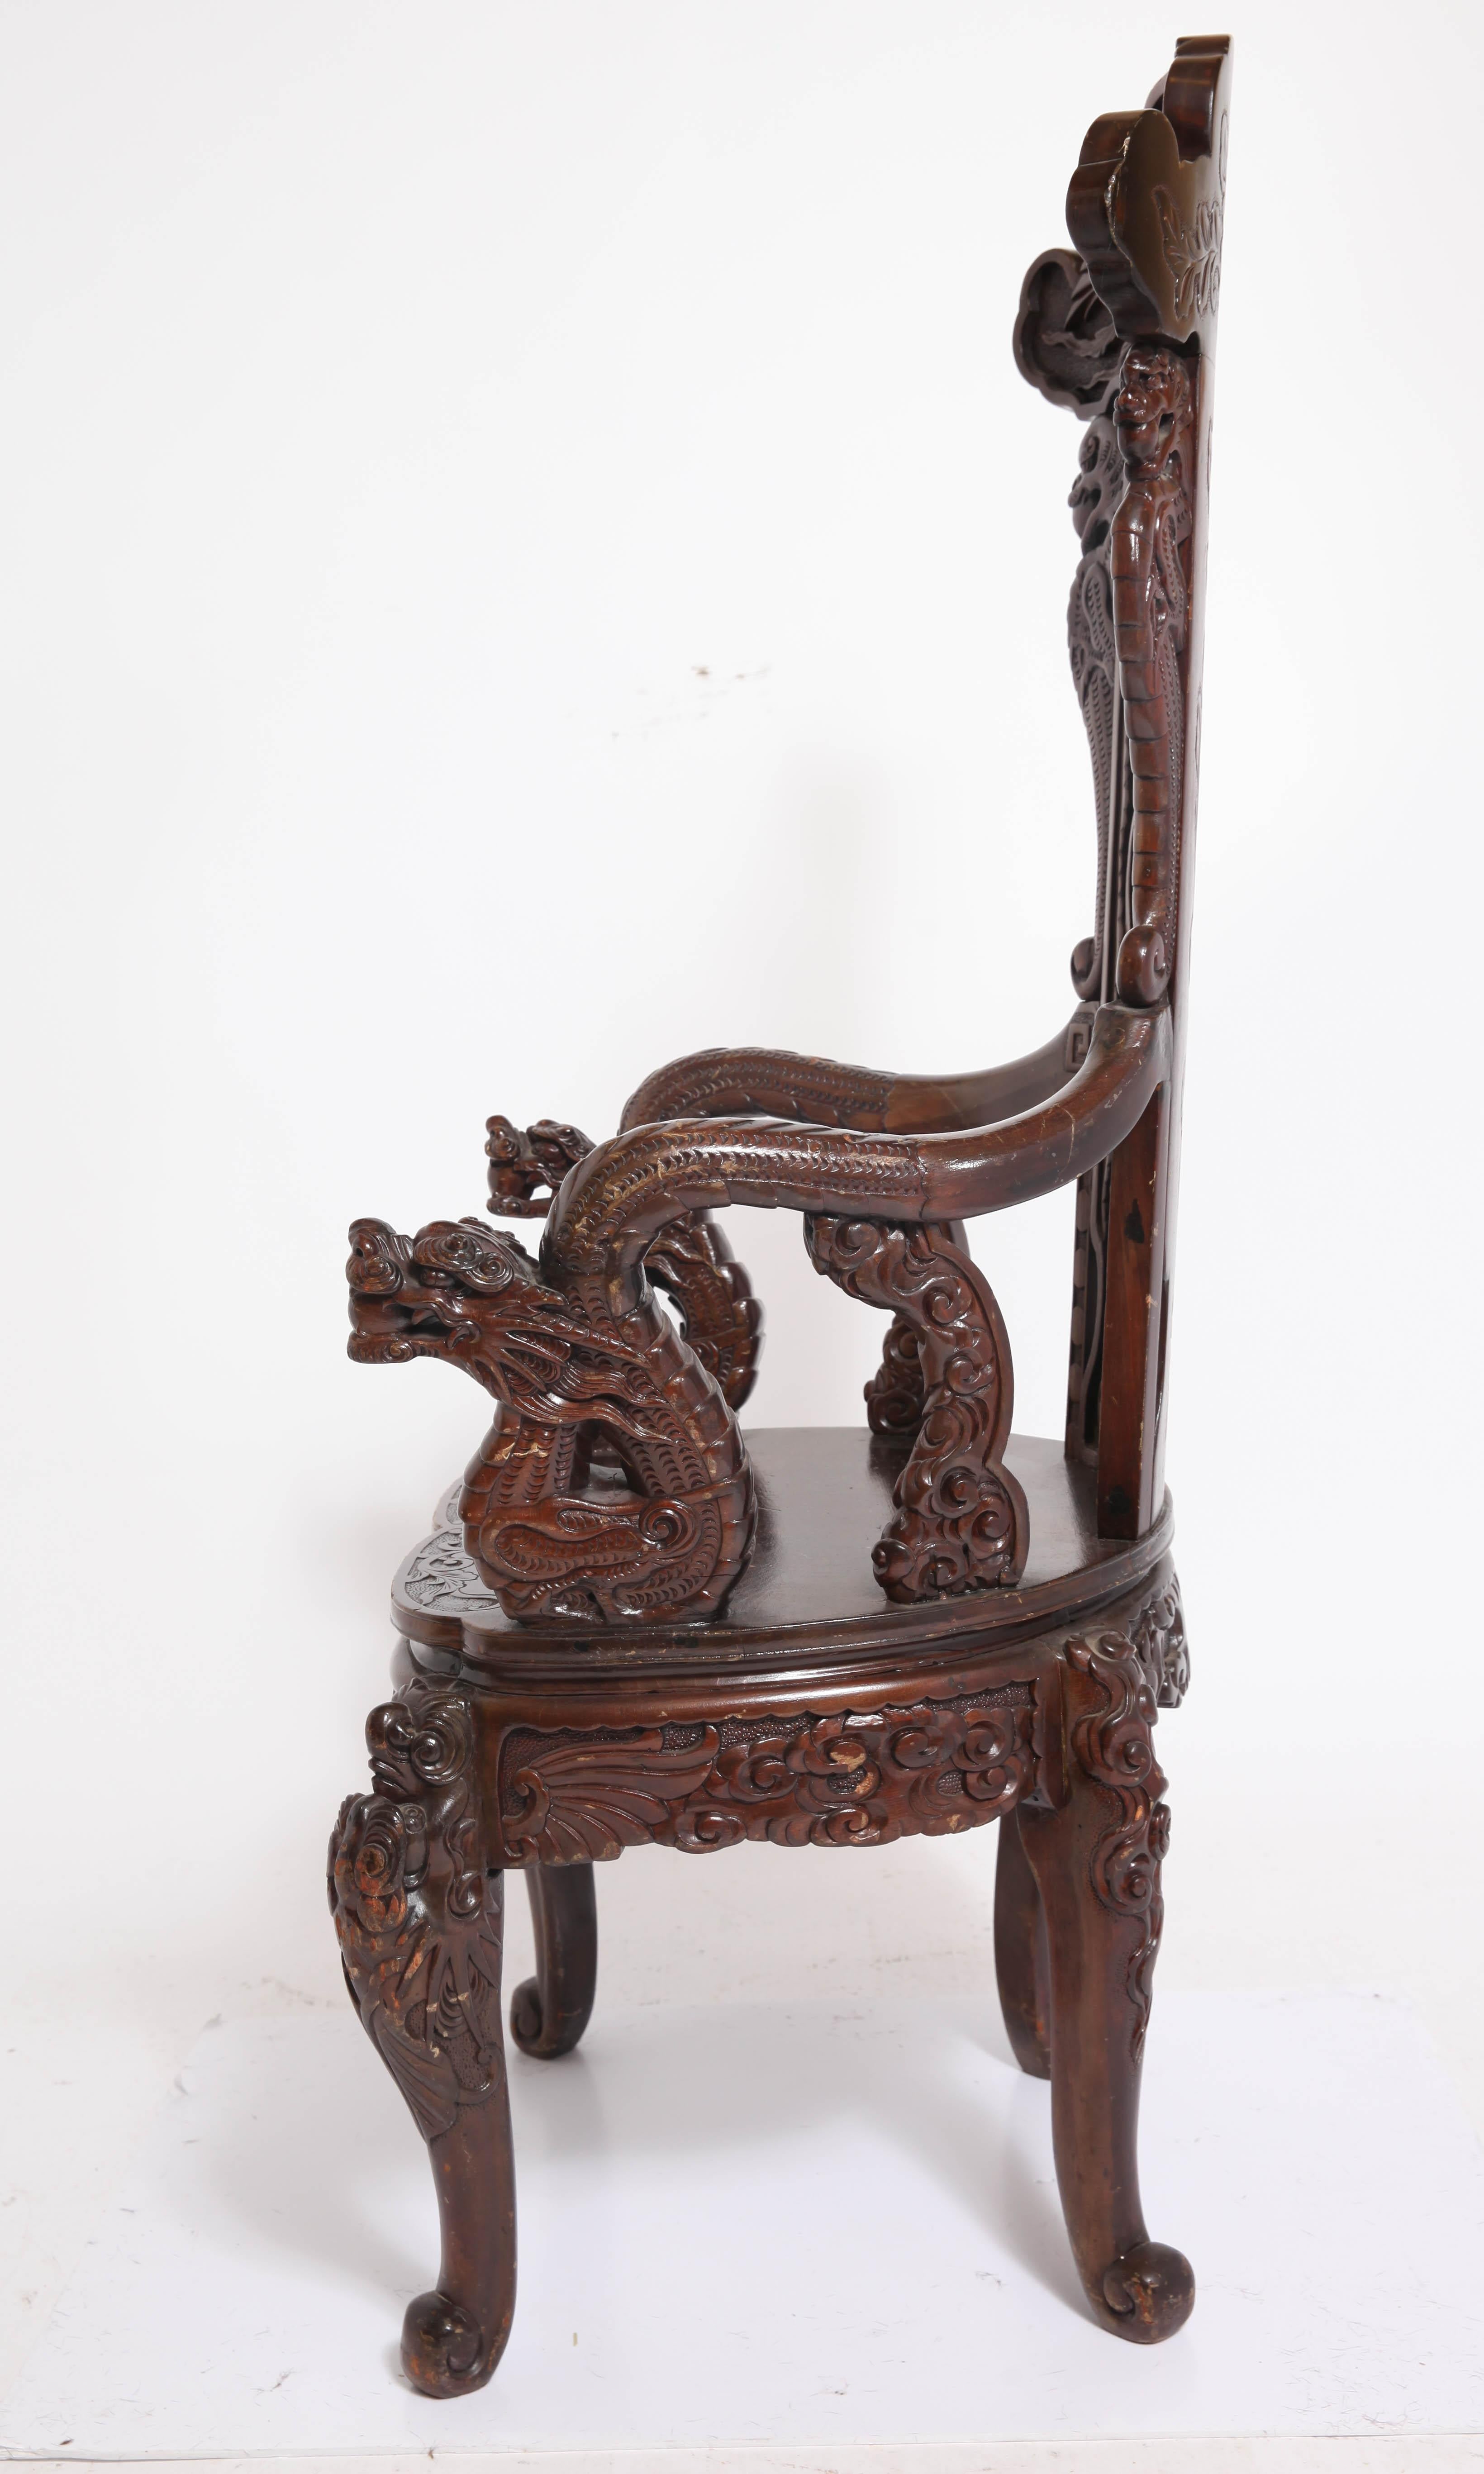 Art Nouveau style Japanese-export high-back armchair with highly detailed carved wood dragon and phoenix theme. The chair is in great vintage condition with some minor age-appropriate wear.